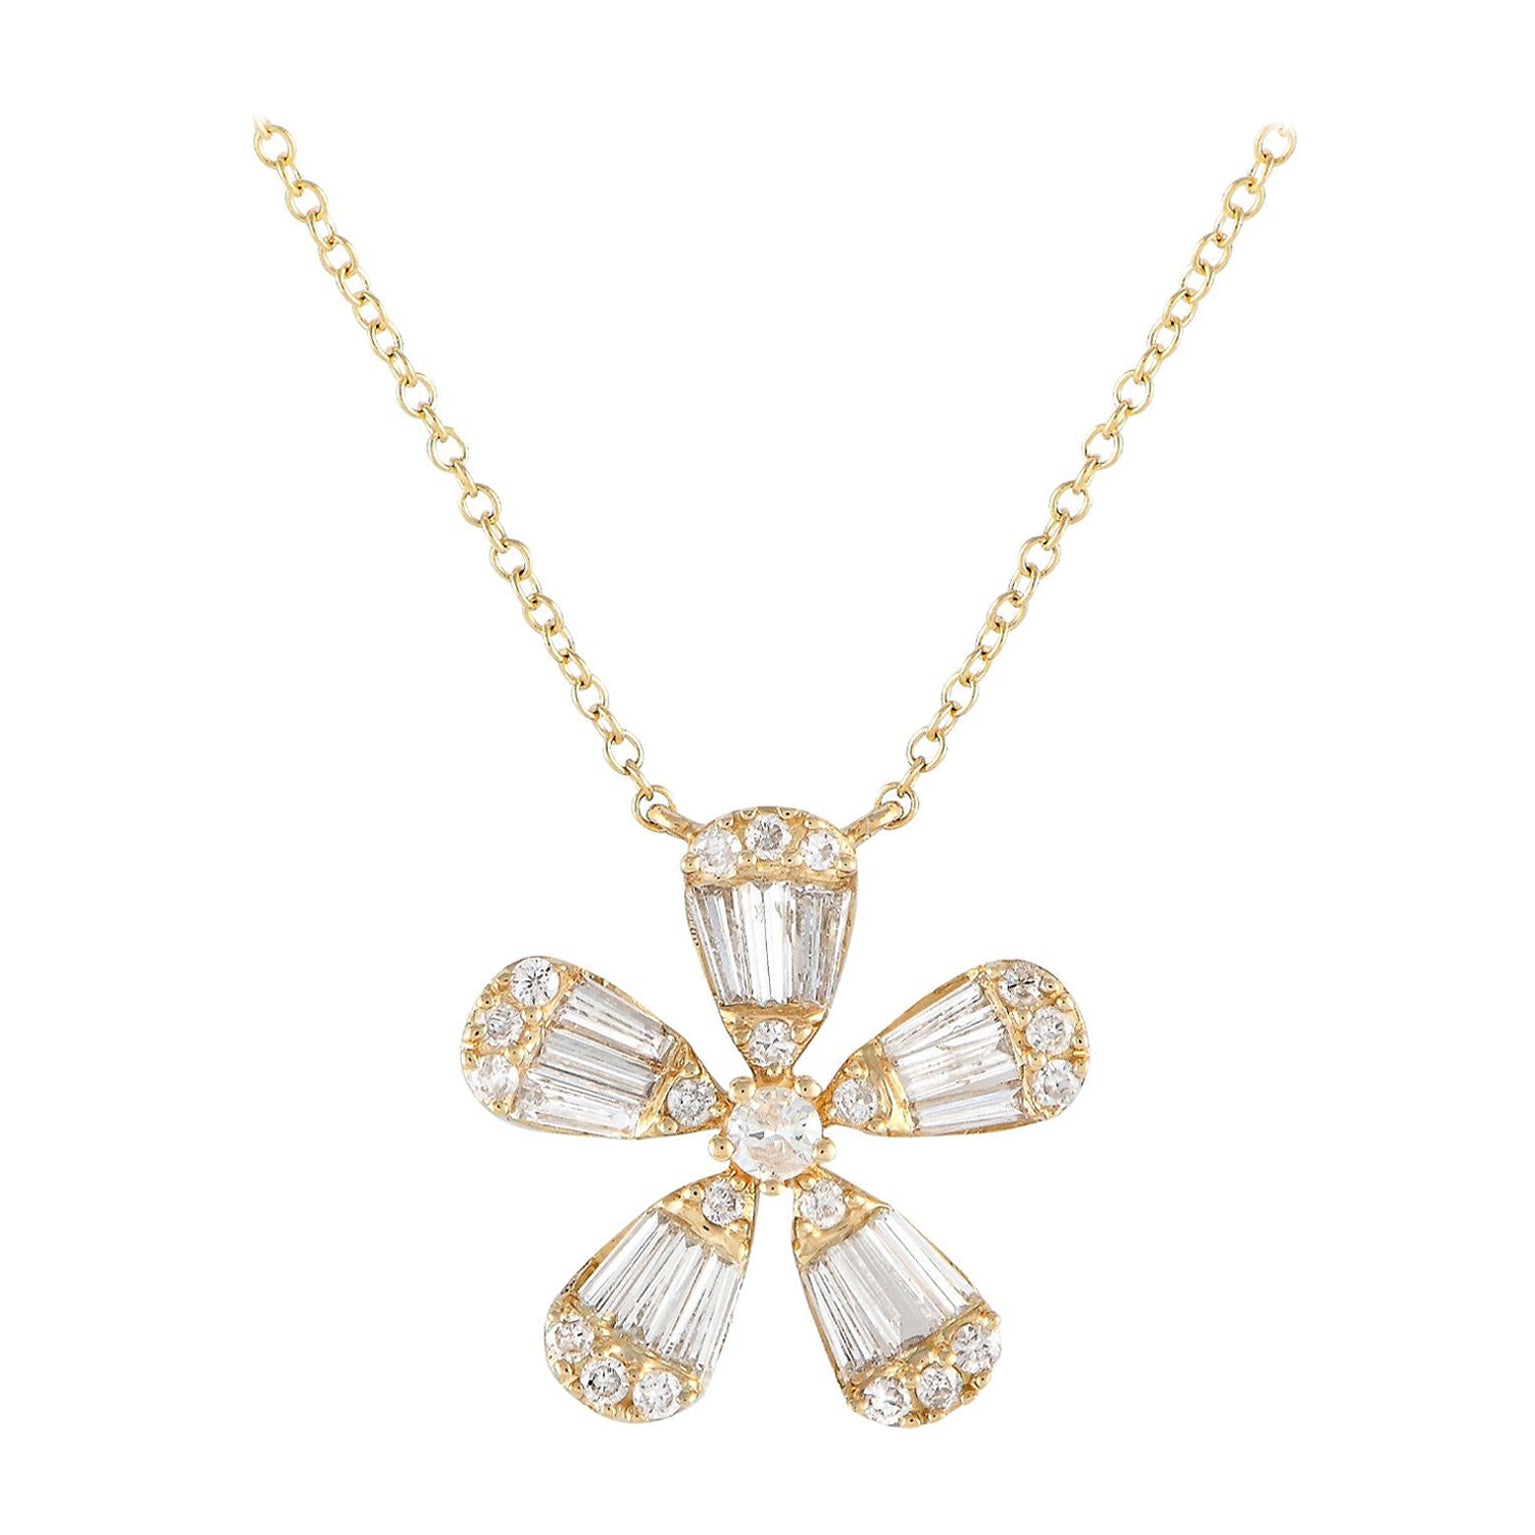 LB Exclusive 14K Yellow Gold 0.65ct Diamond Flower Necklace NK01351 For Sale